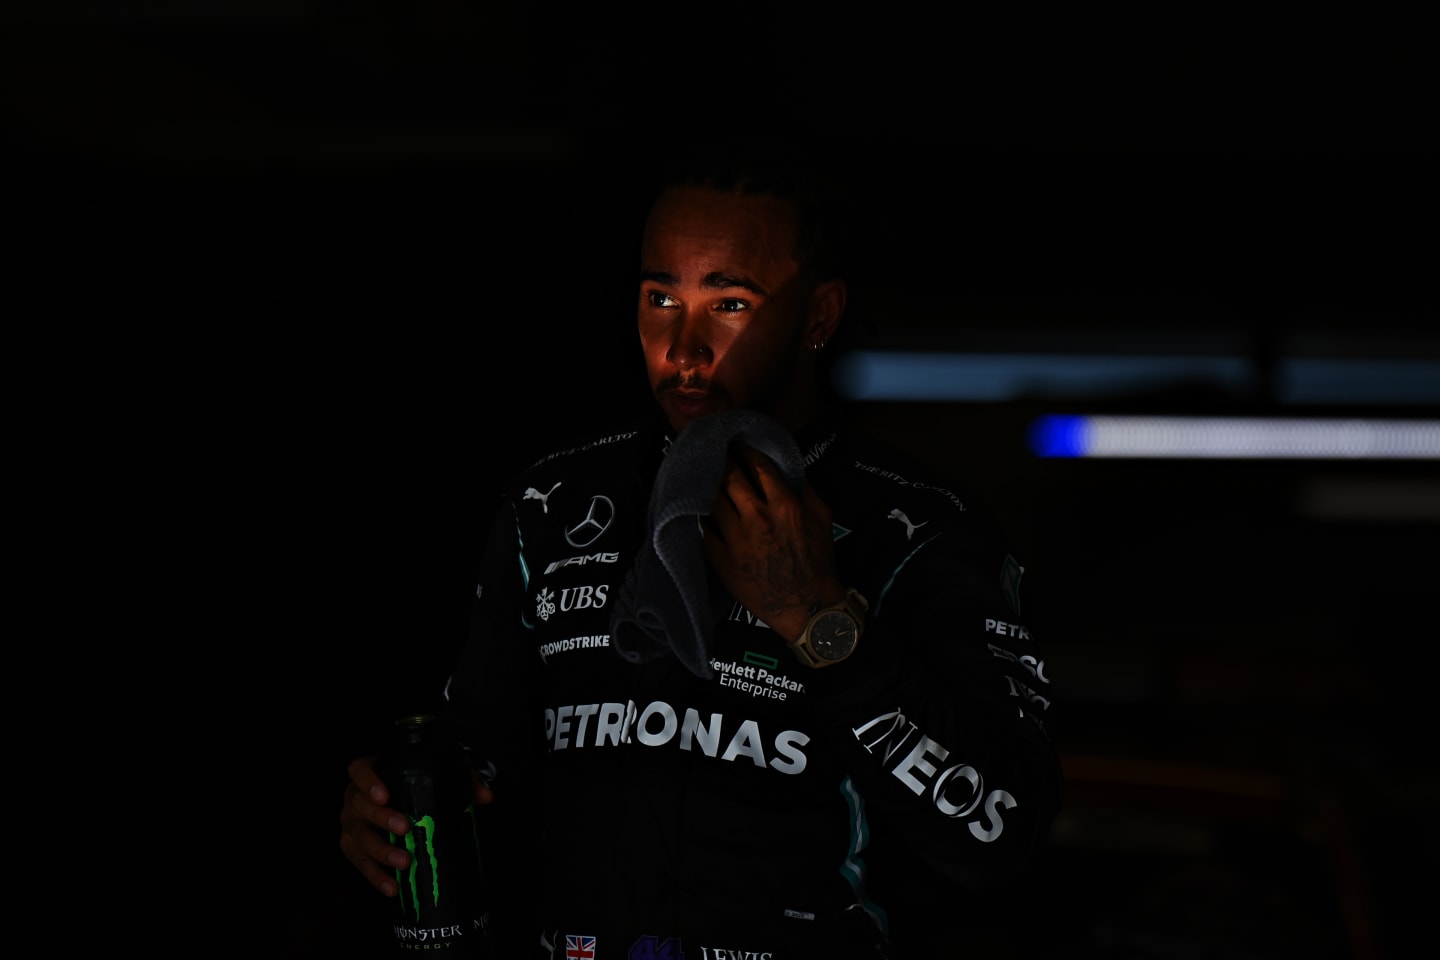 AUSTIN, TEXAS - OCTOBER 24: Second placed Lewis Hamilton of Great Britain and Mercedes GP looks on in parc ferme during the F1 Grand Prix of USA at Circuit of The Americas on October 24, 2021 in Austin, Texas. (Photo by Clive Mason - Formula 1/Formula 1 via Getty Images)